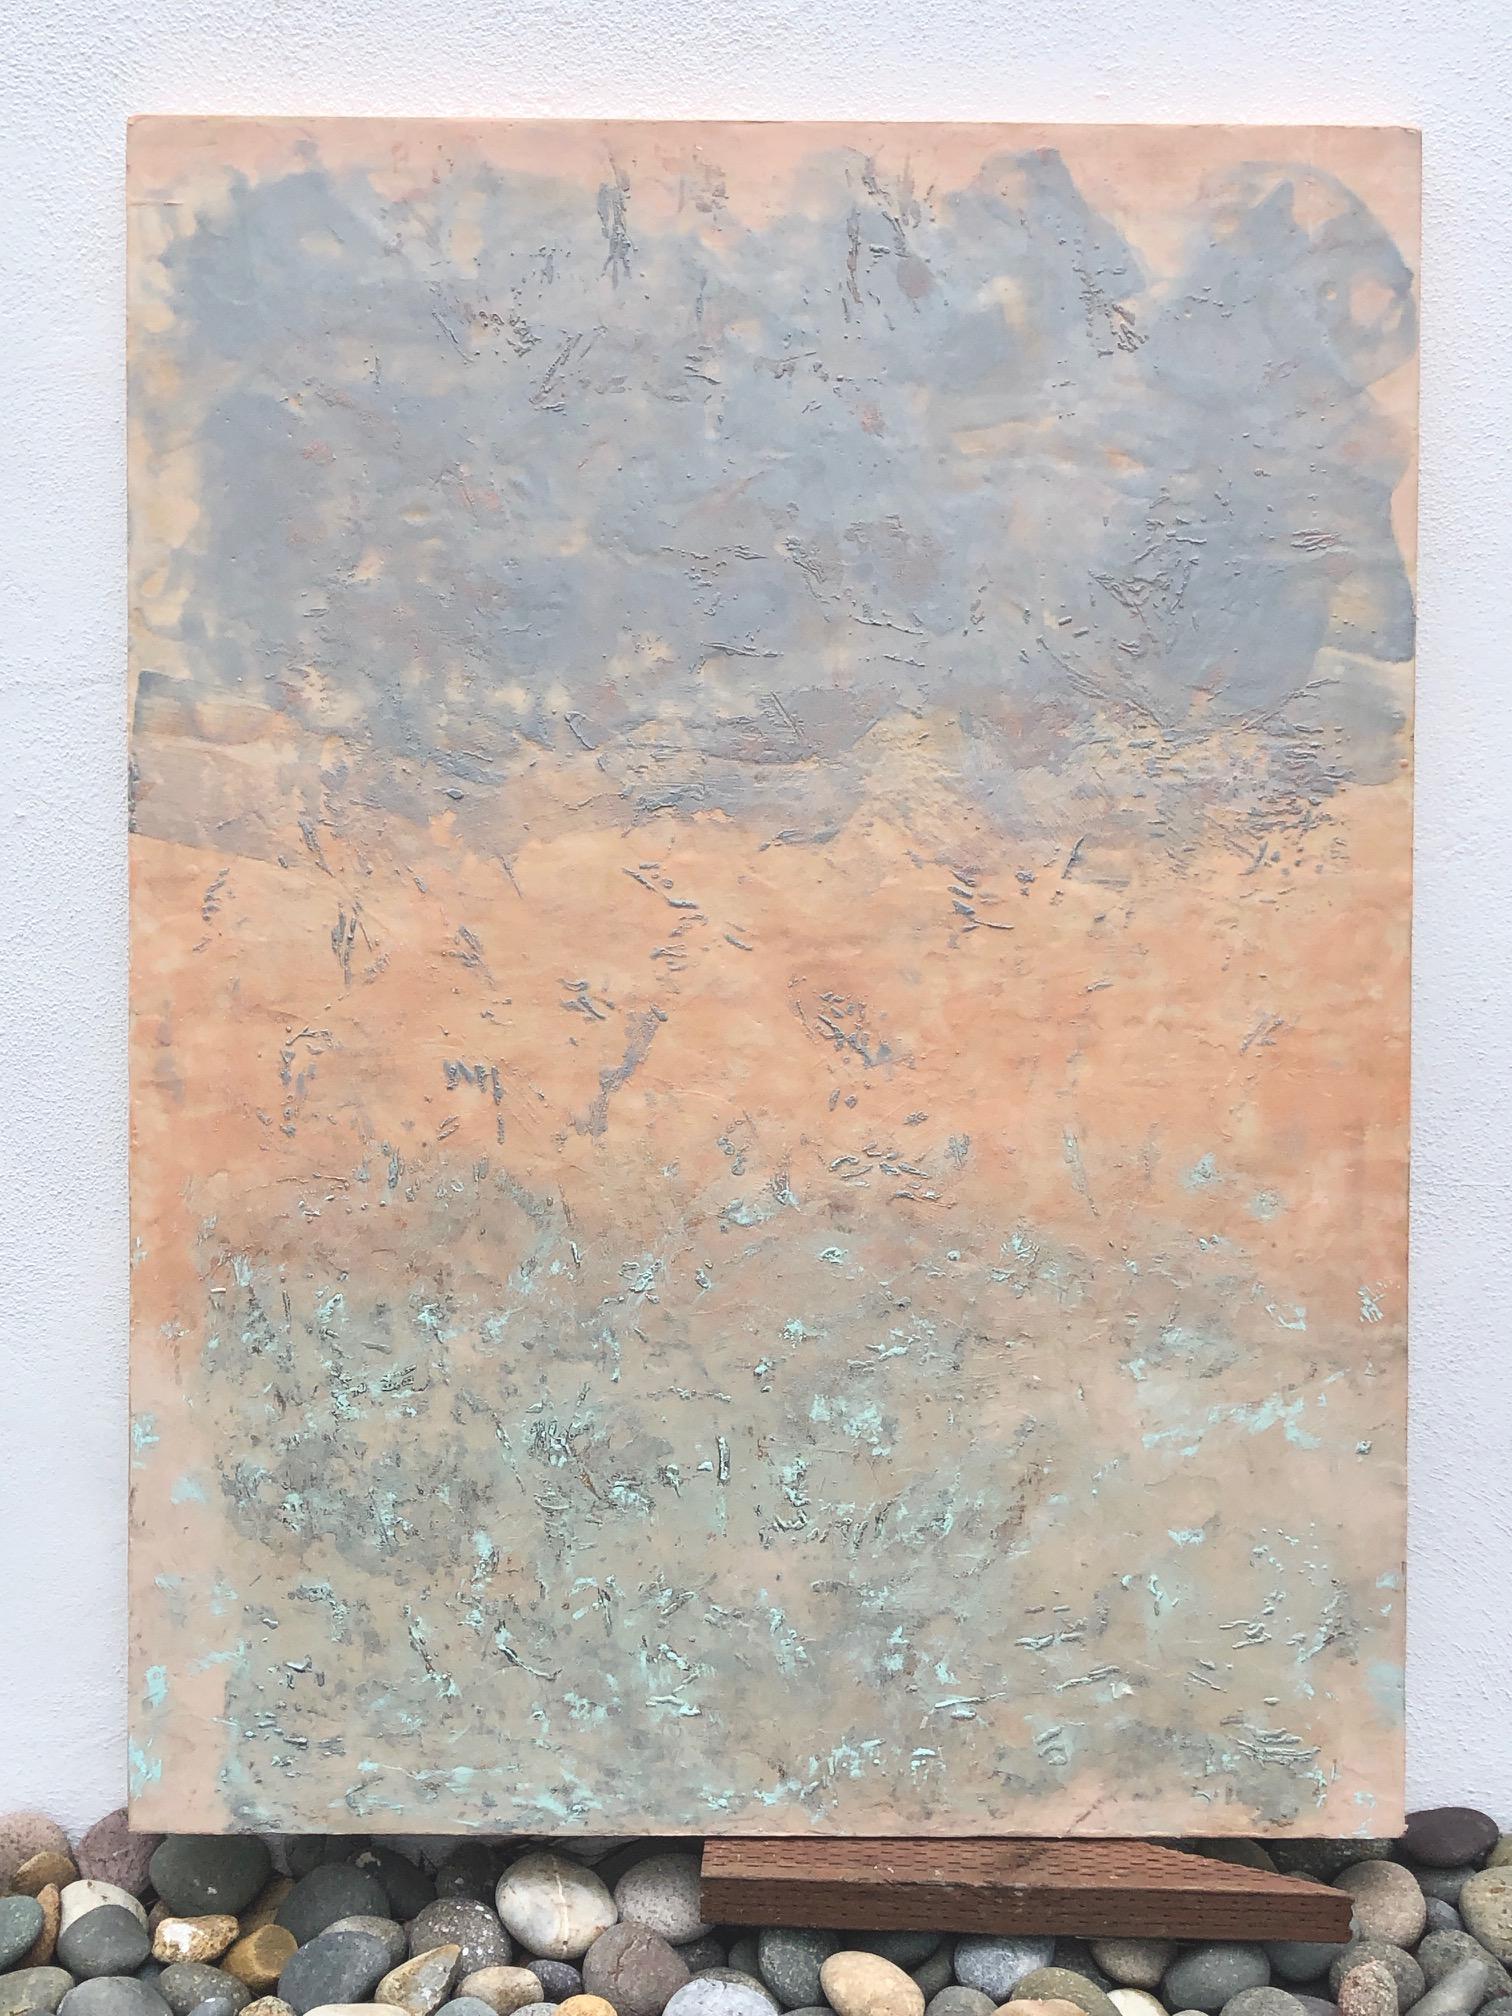 Ethereal - Large Square Encaustic (Wax) Abstract Painting with Peach, and Blue 1